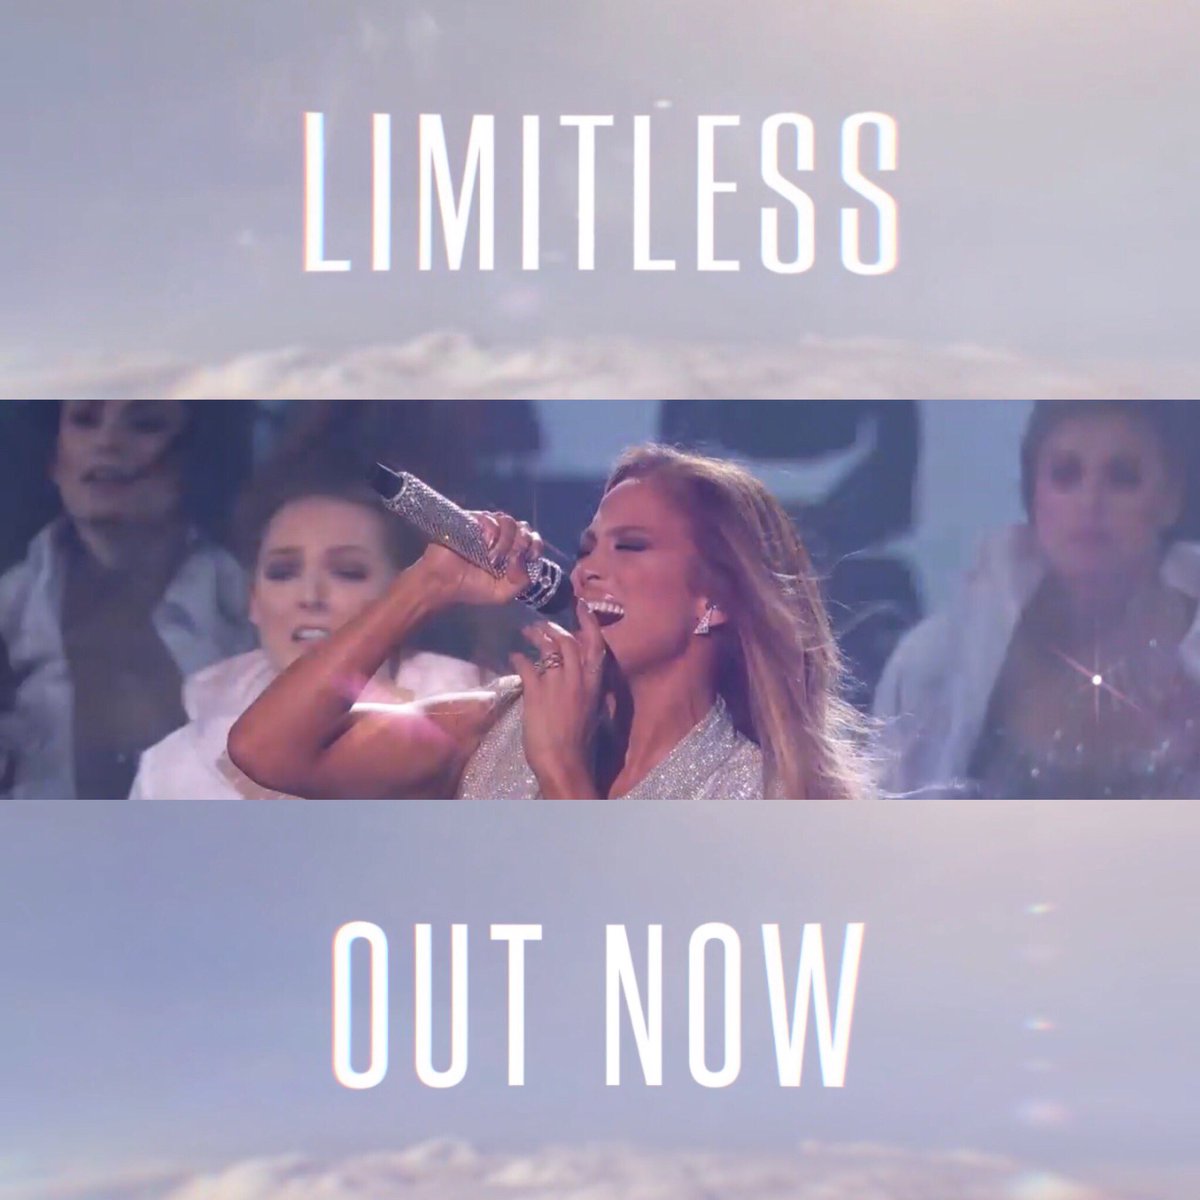 STREAM & DOWNLOAD #LIMITLESS from #SECONDACT https://t.co/EoeOGEJ0H1 https://t.co/W1er0f8z1y